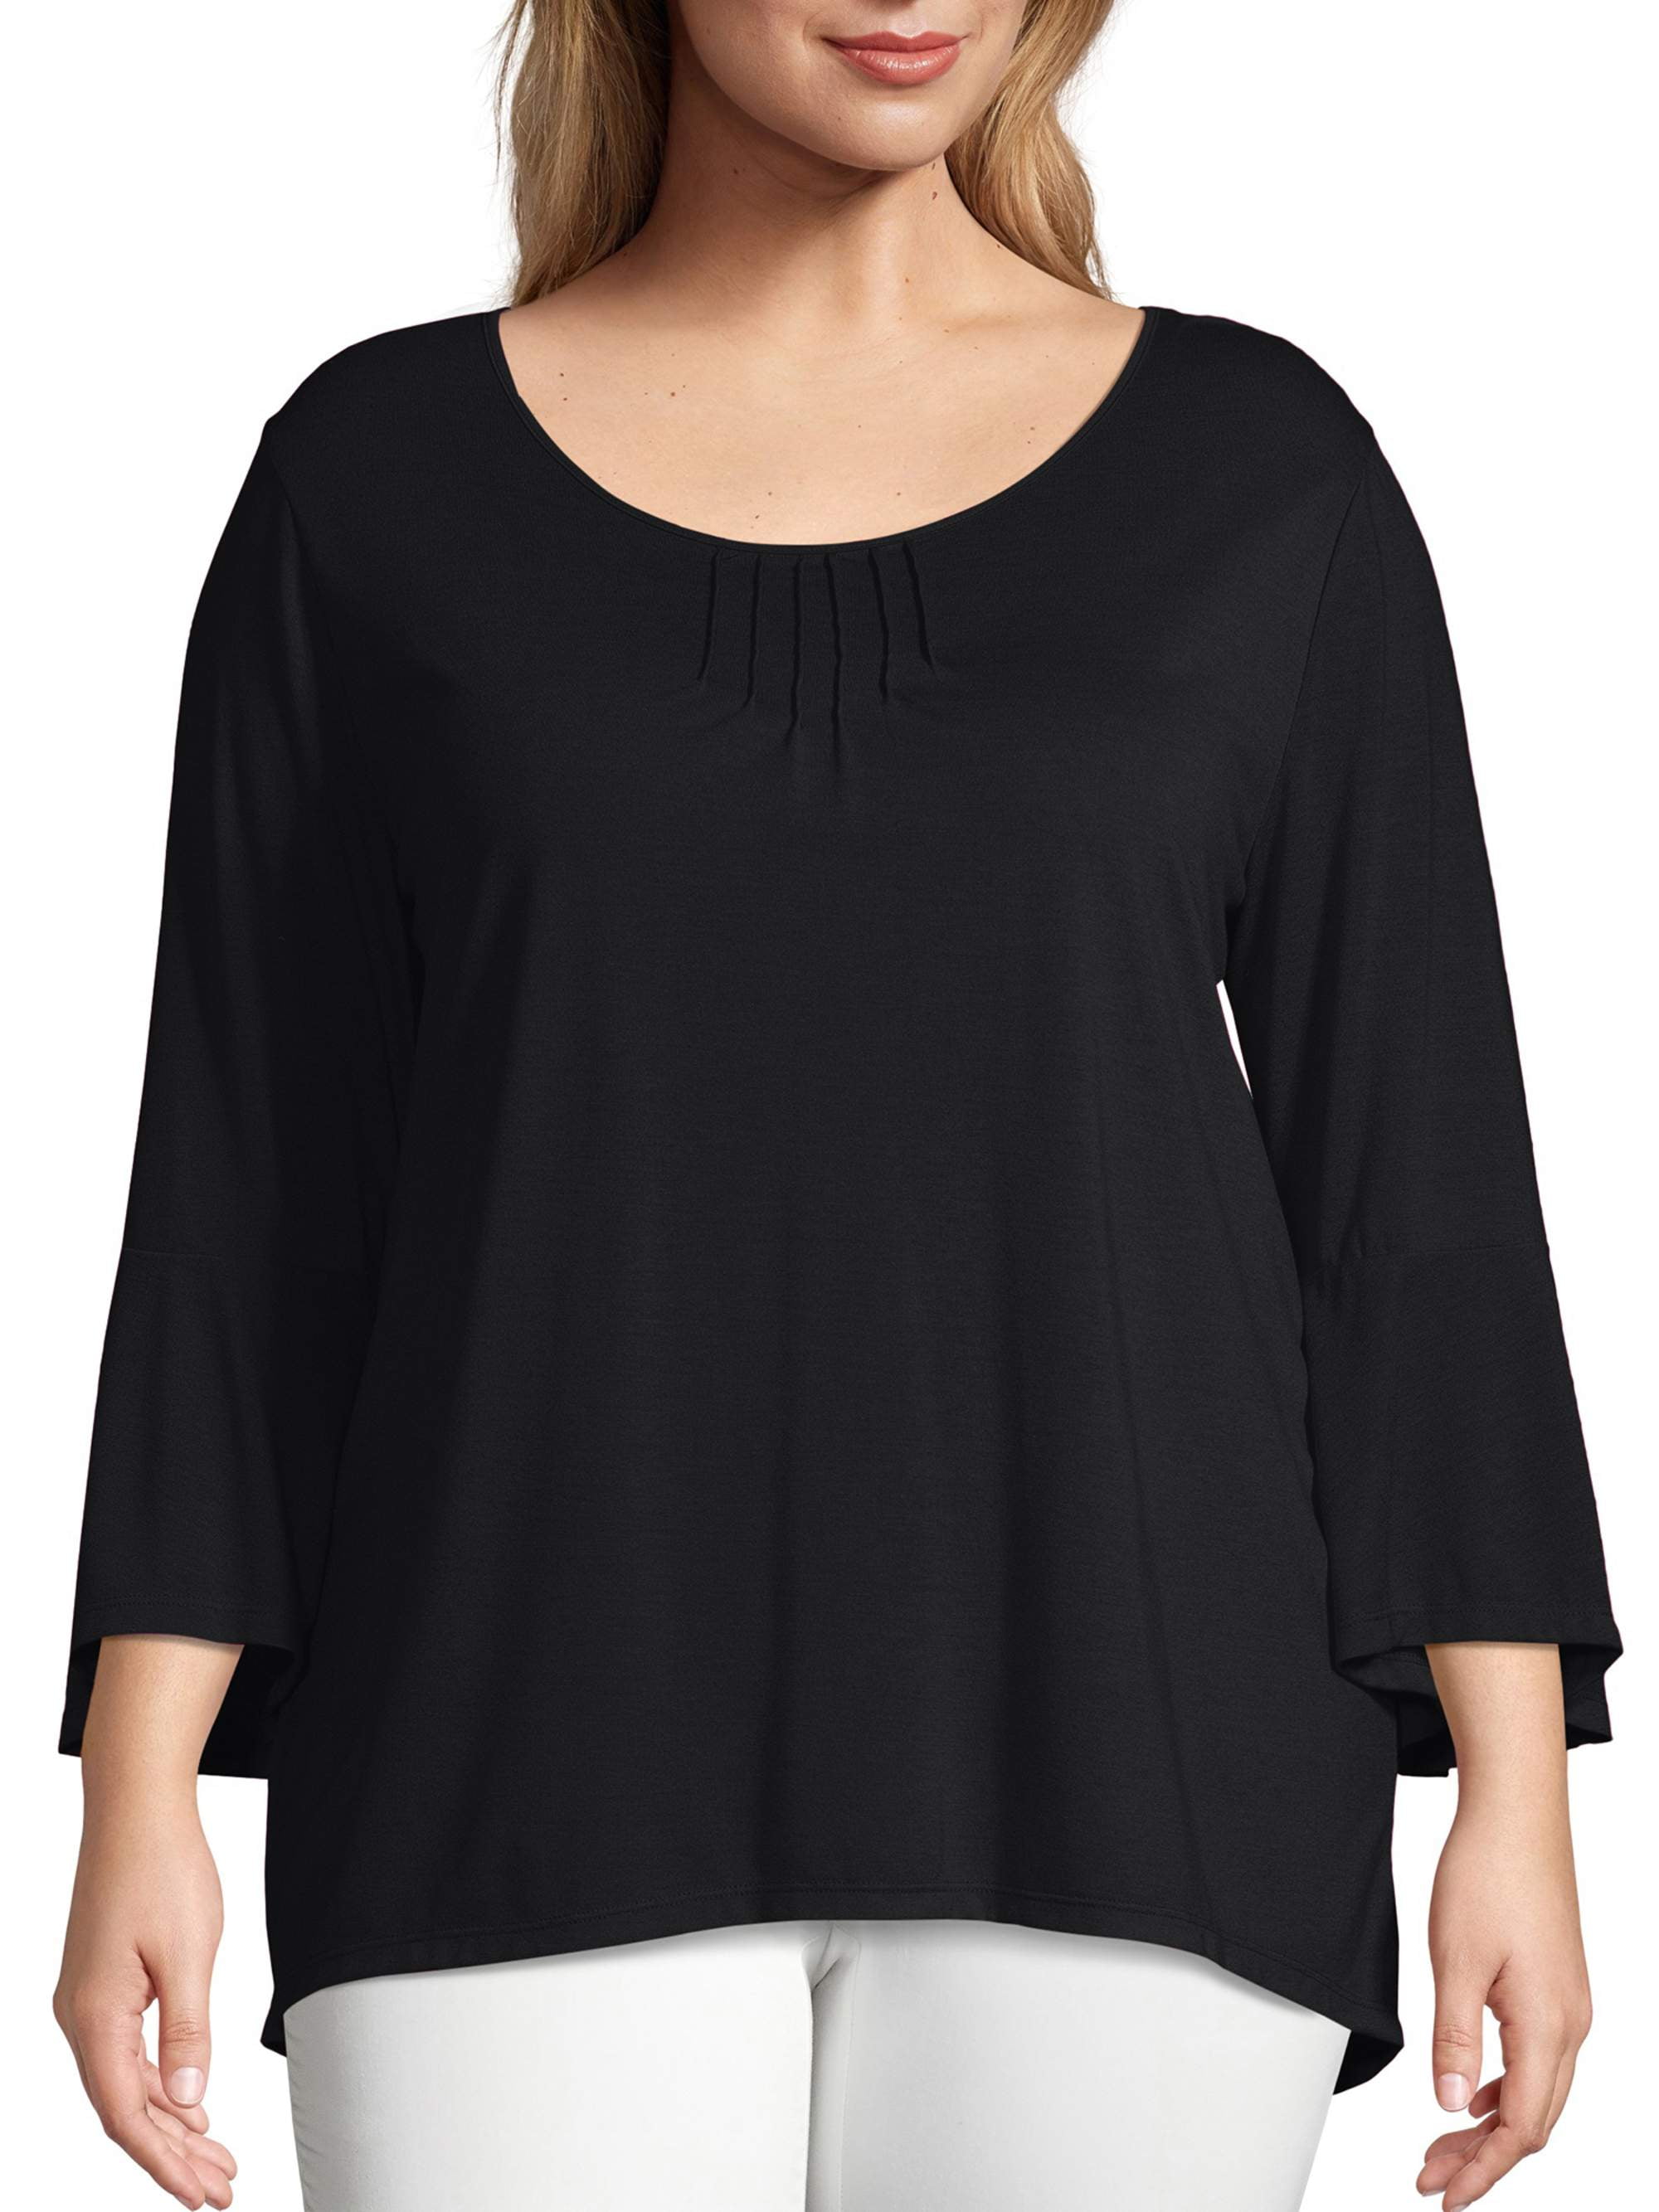 Just My Size Women's Plus Size Bell Sleeve Pin-tuck Top - Walmart.com